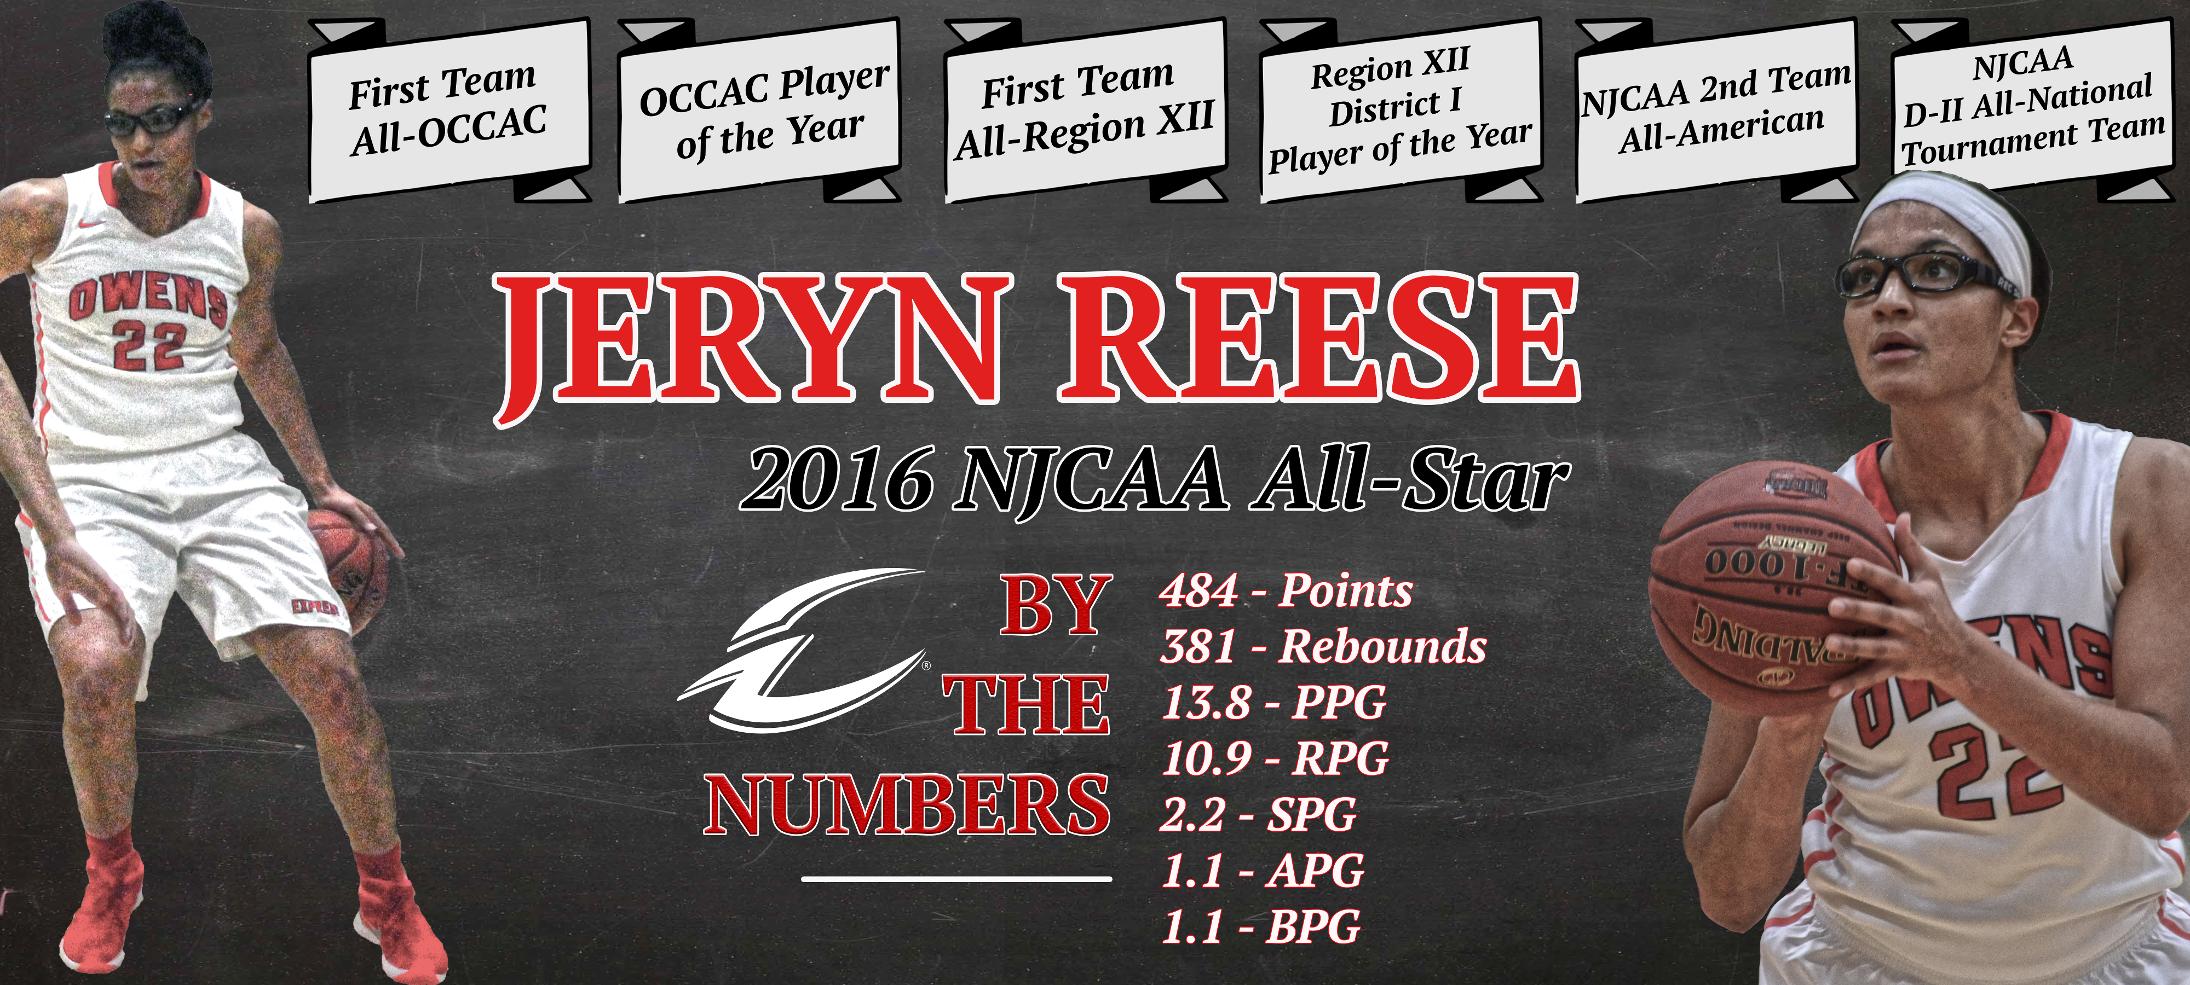 Reese Selected For NJCAA All-Star Game, To Have Jersey Displayed At HOF